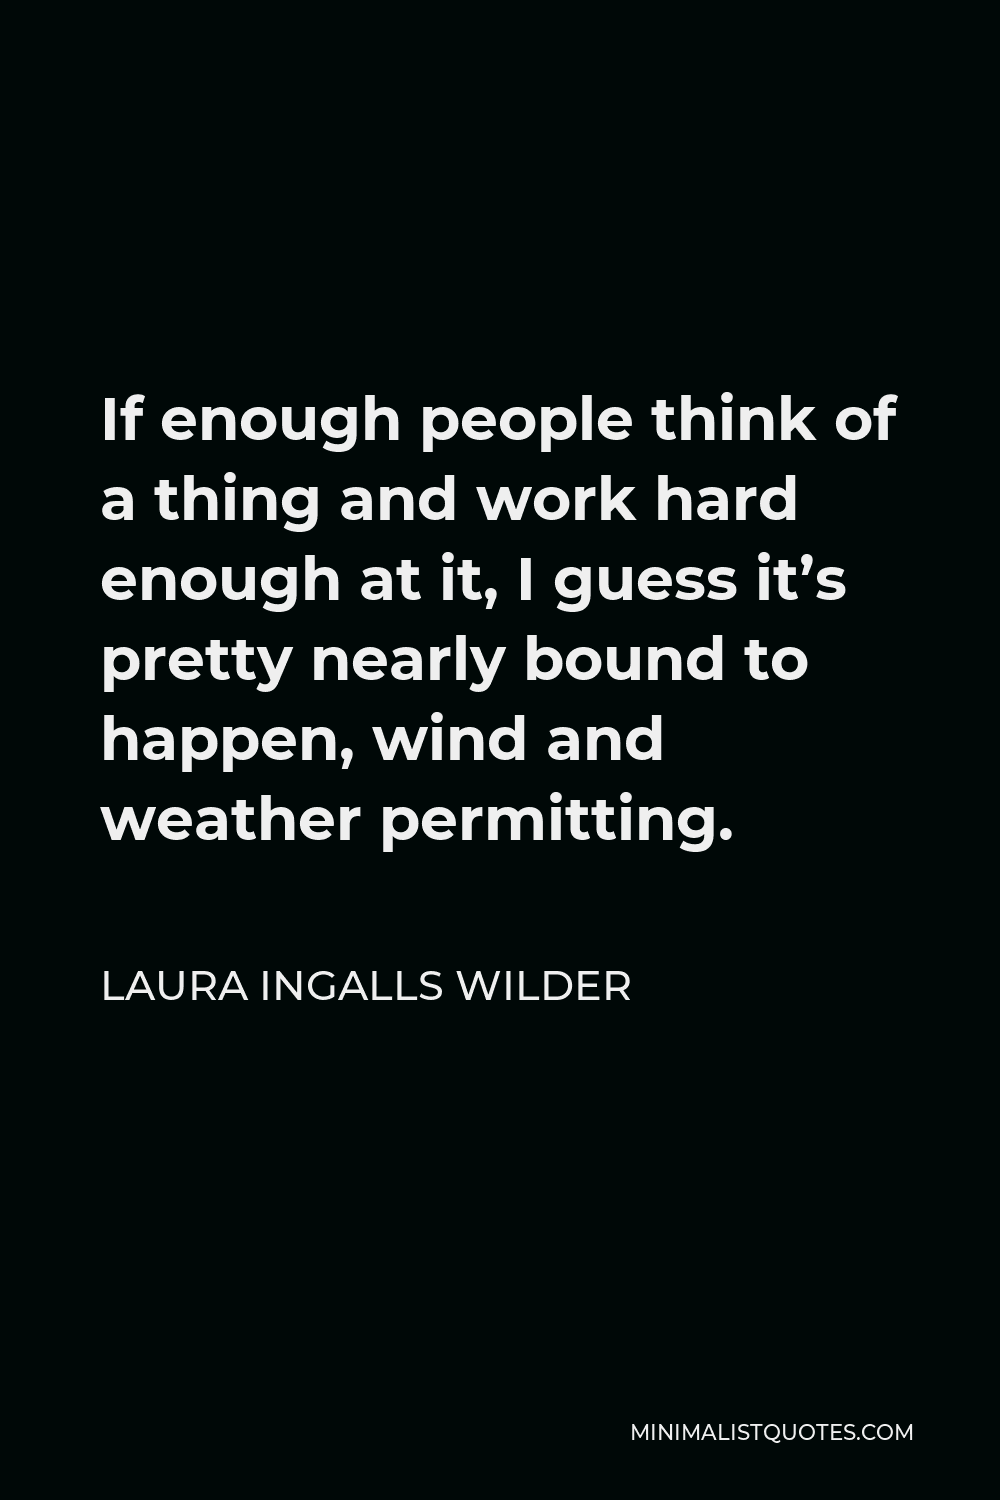 Laura Ingalls Wilder Quote - If enough people think of a thing and work hard enough at it, I guess it’s pretty nearly bound to happen, wind and weather permitting.